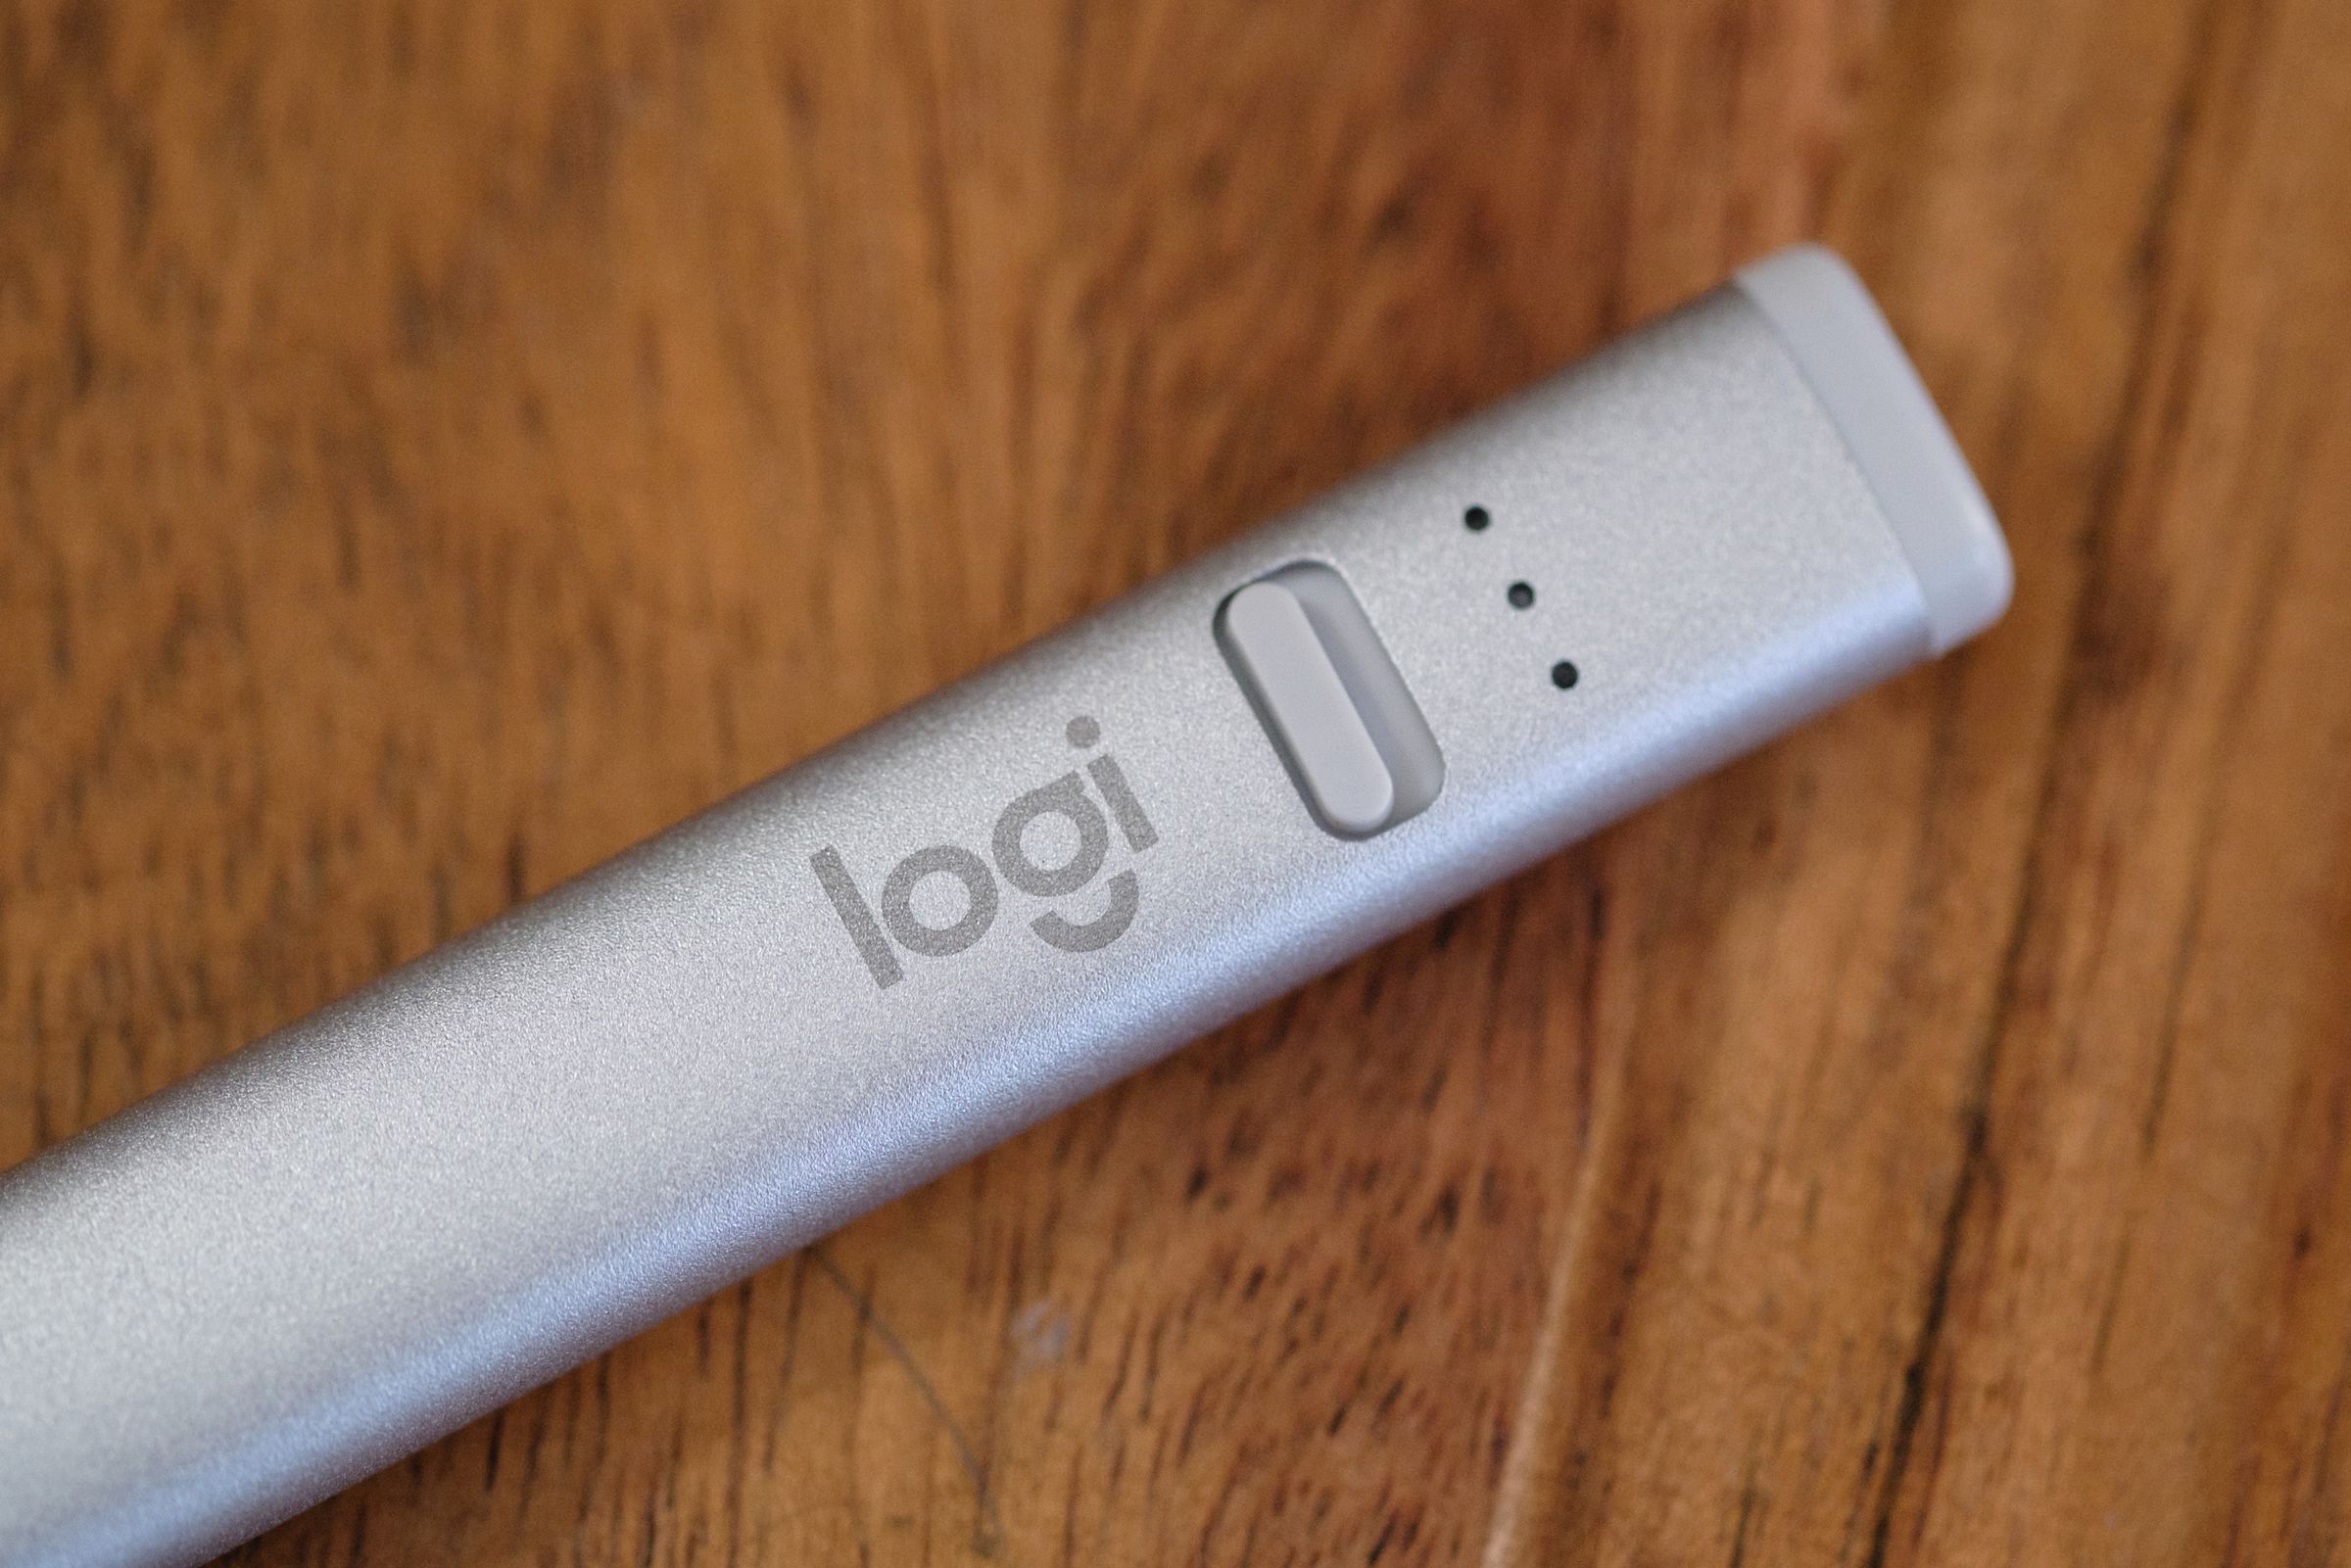 A close-up of the Logitech Crayon's power switch and battery gauge.